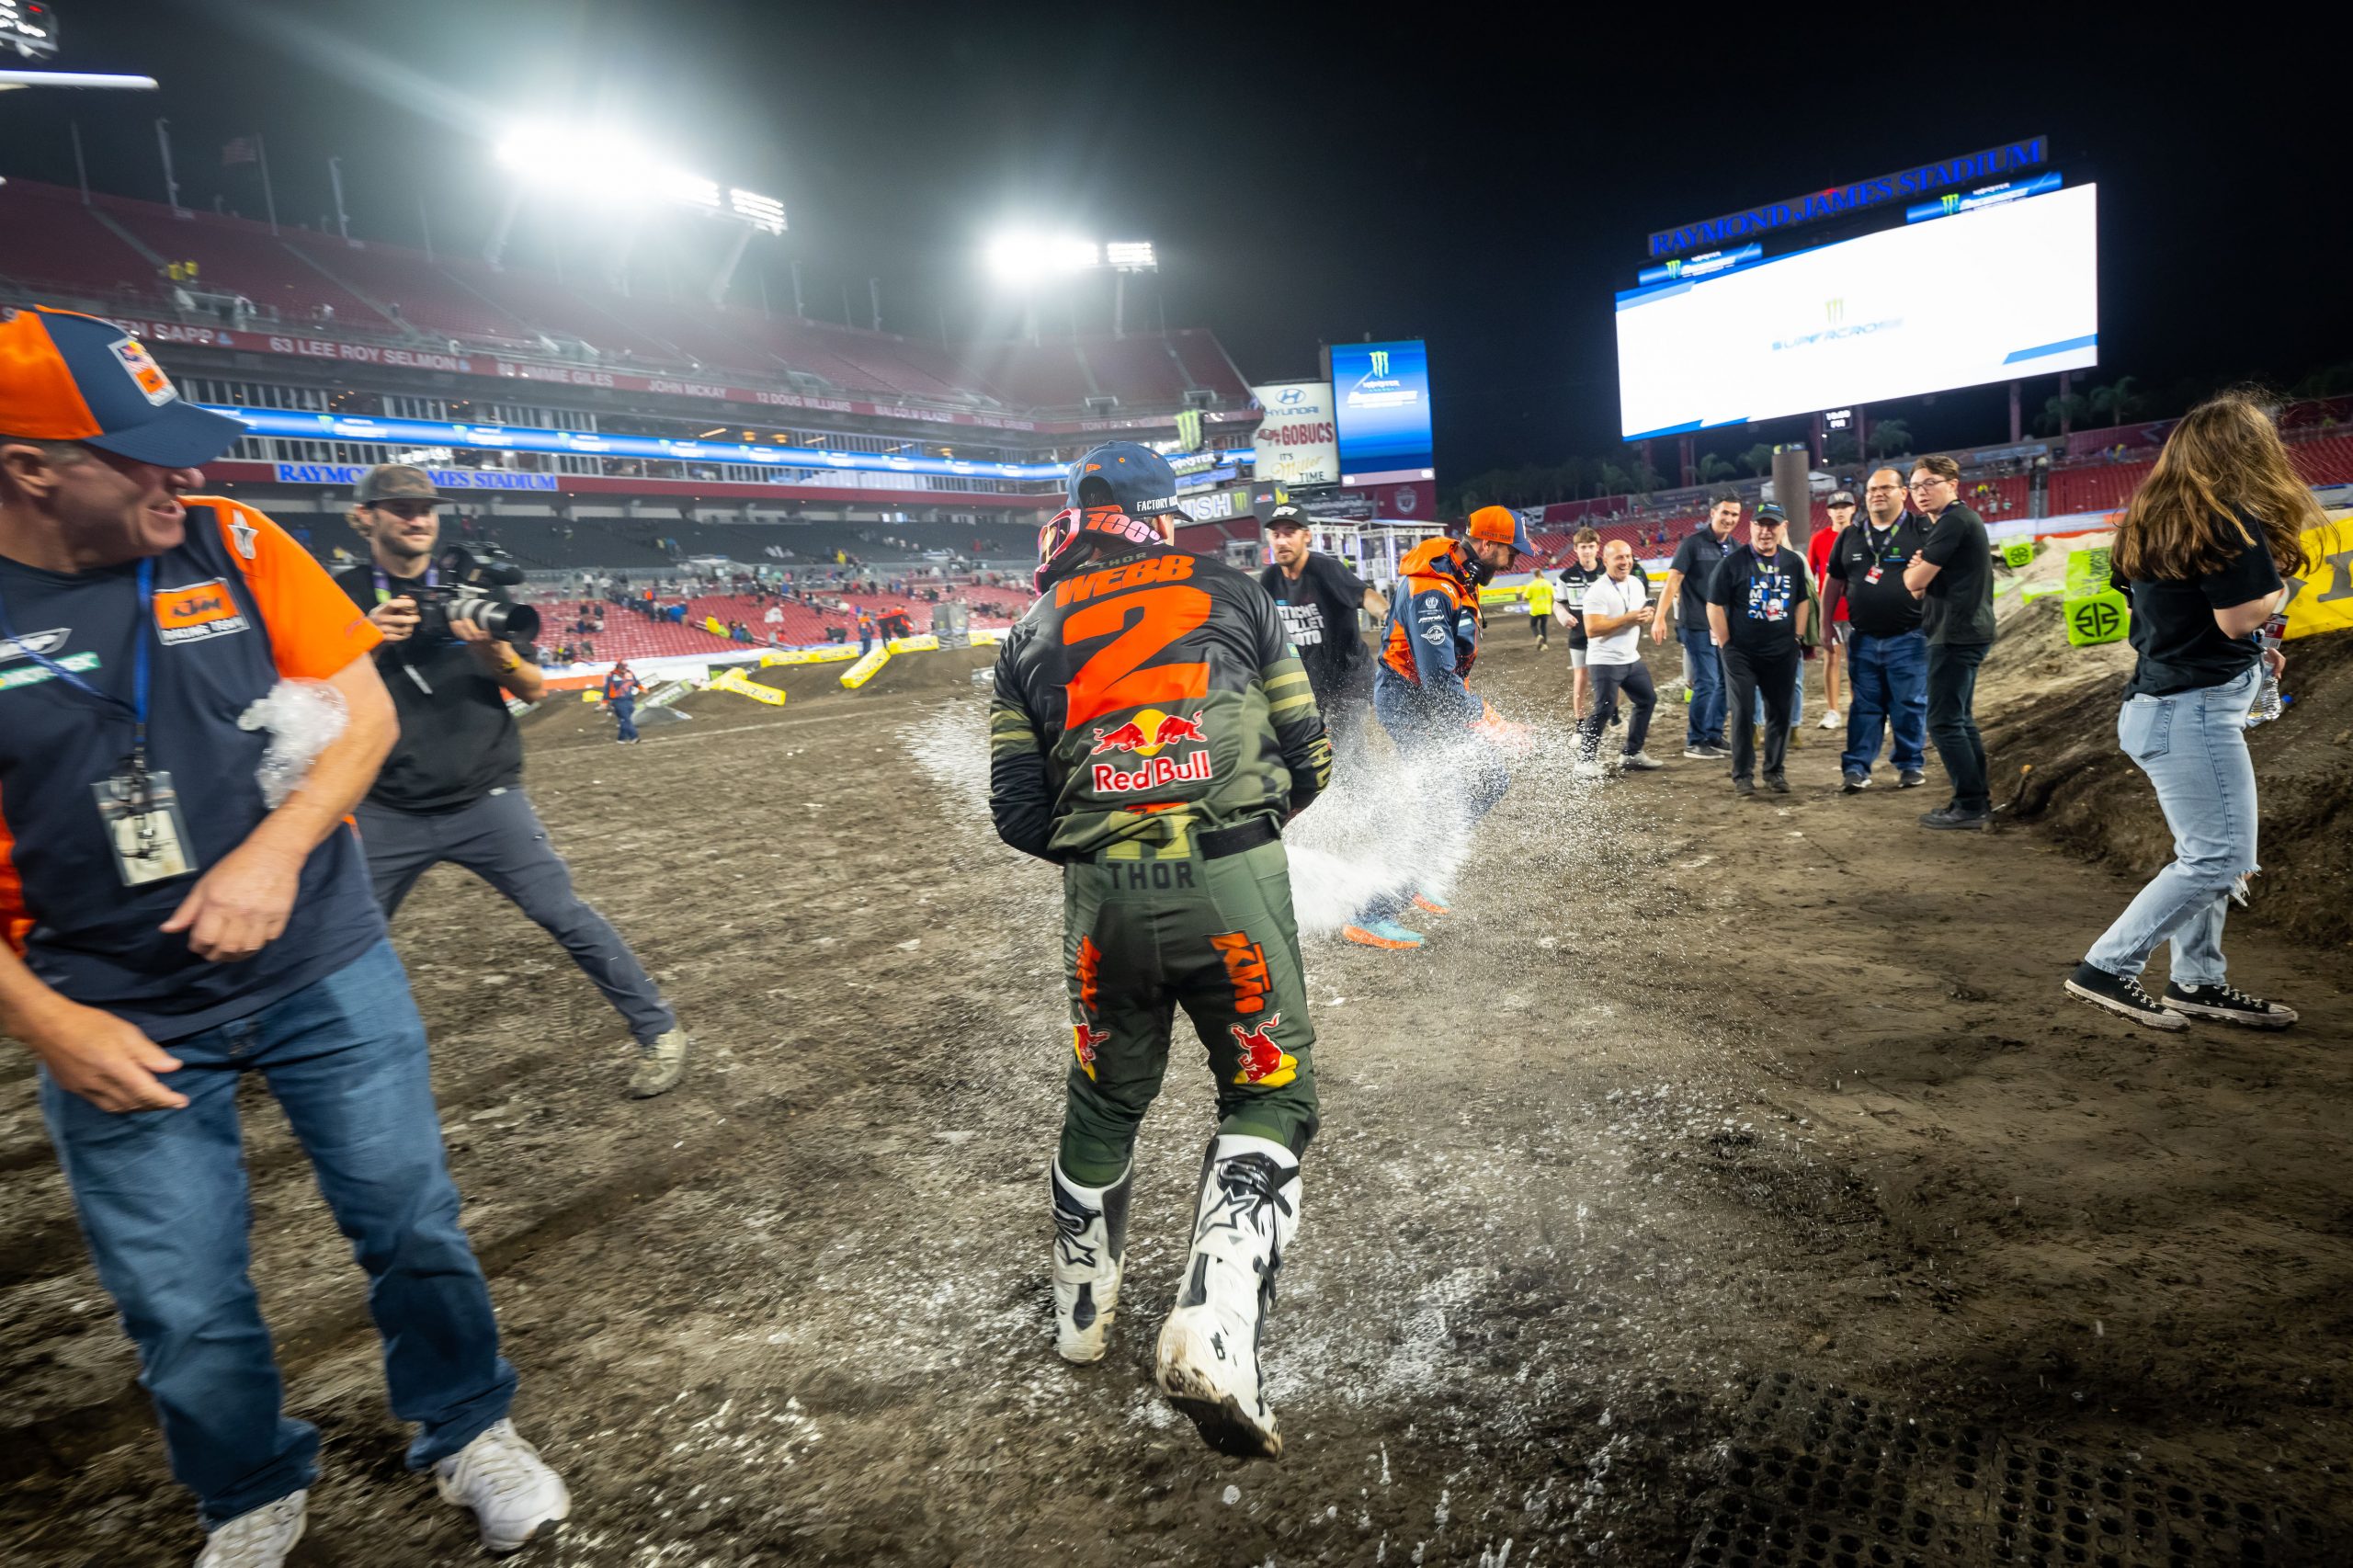 RED BULL KTM PODIUM DOUBLE IN TAMPA AS COOPER WEBB CLAIMS FIRST SUPERCROSS WIN OF 2023